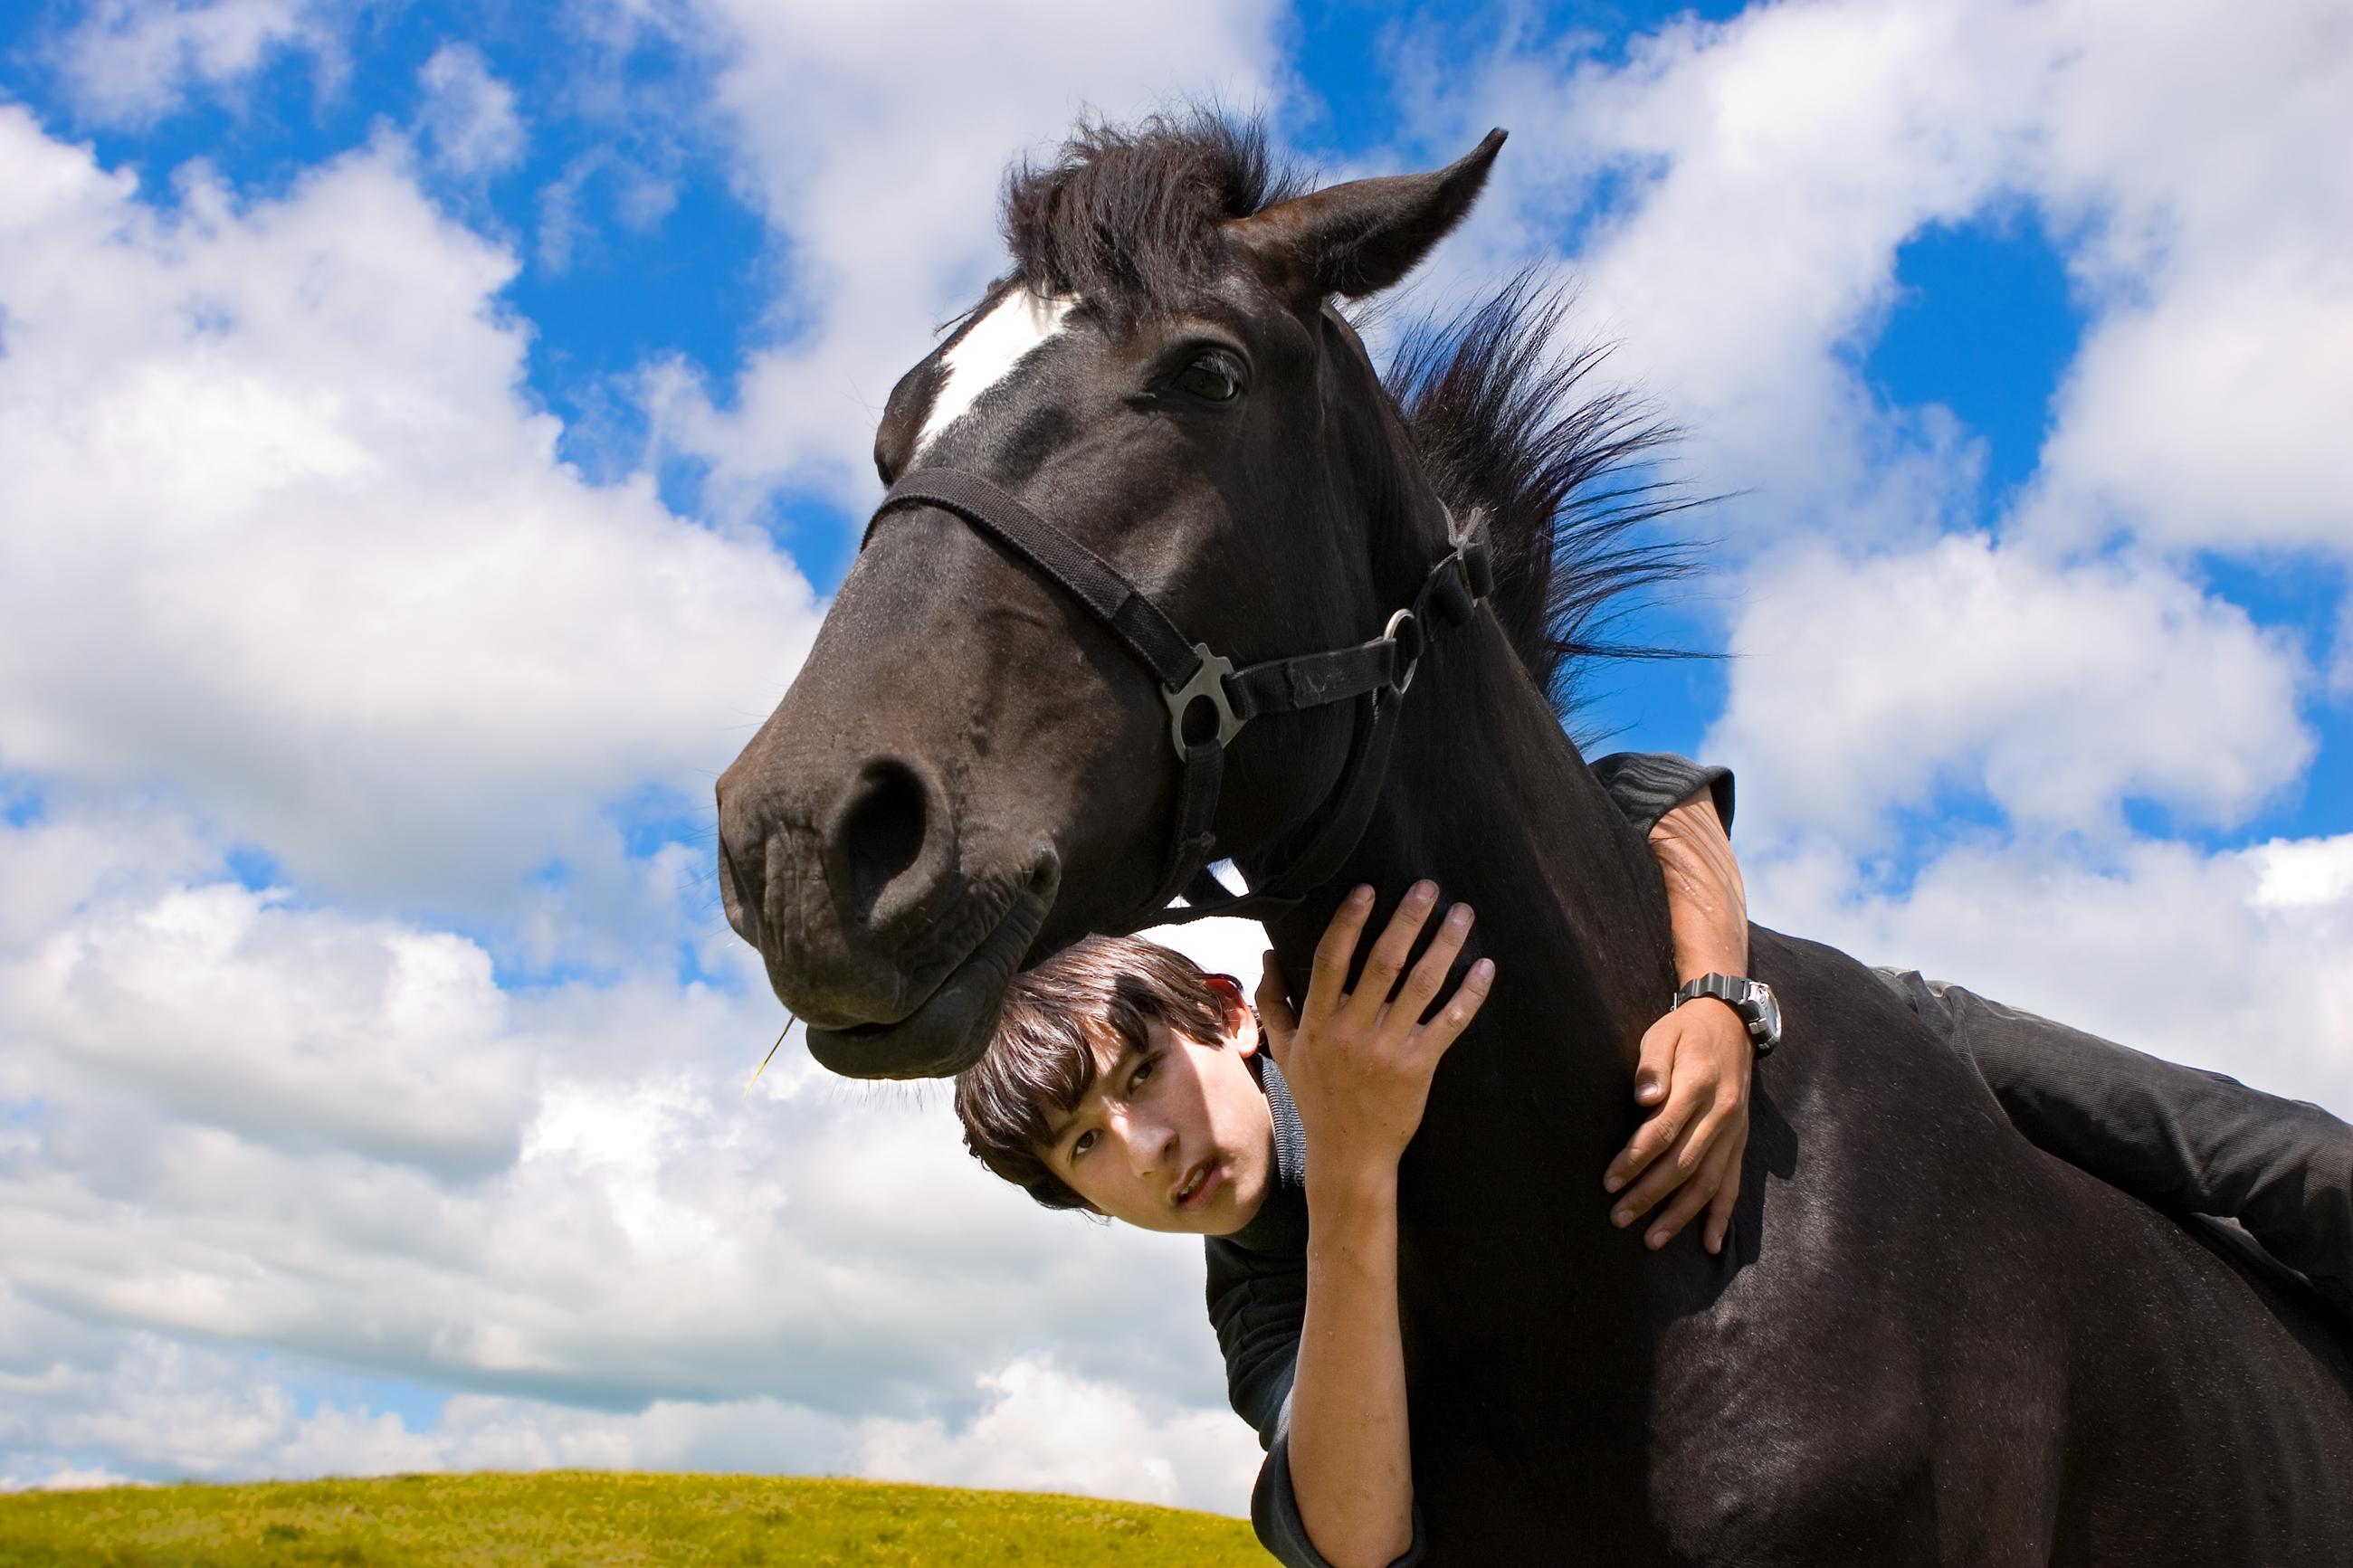 Horseback riding is an activity that many can enjoy!